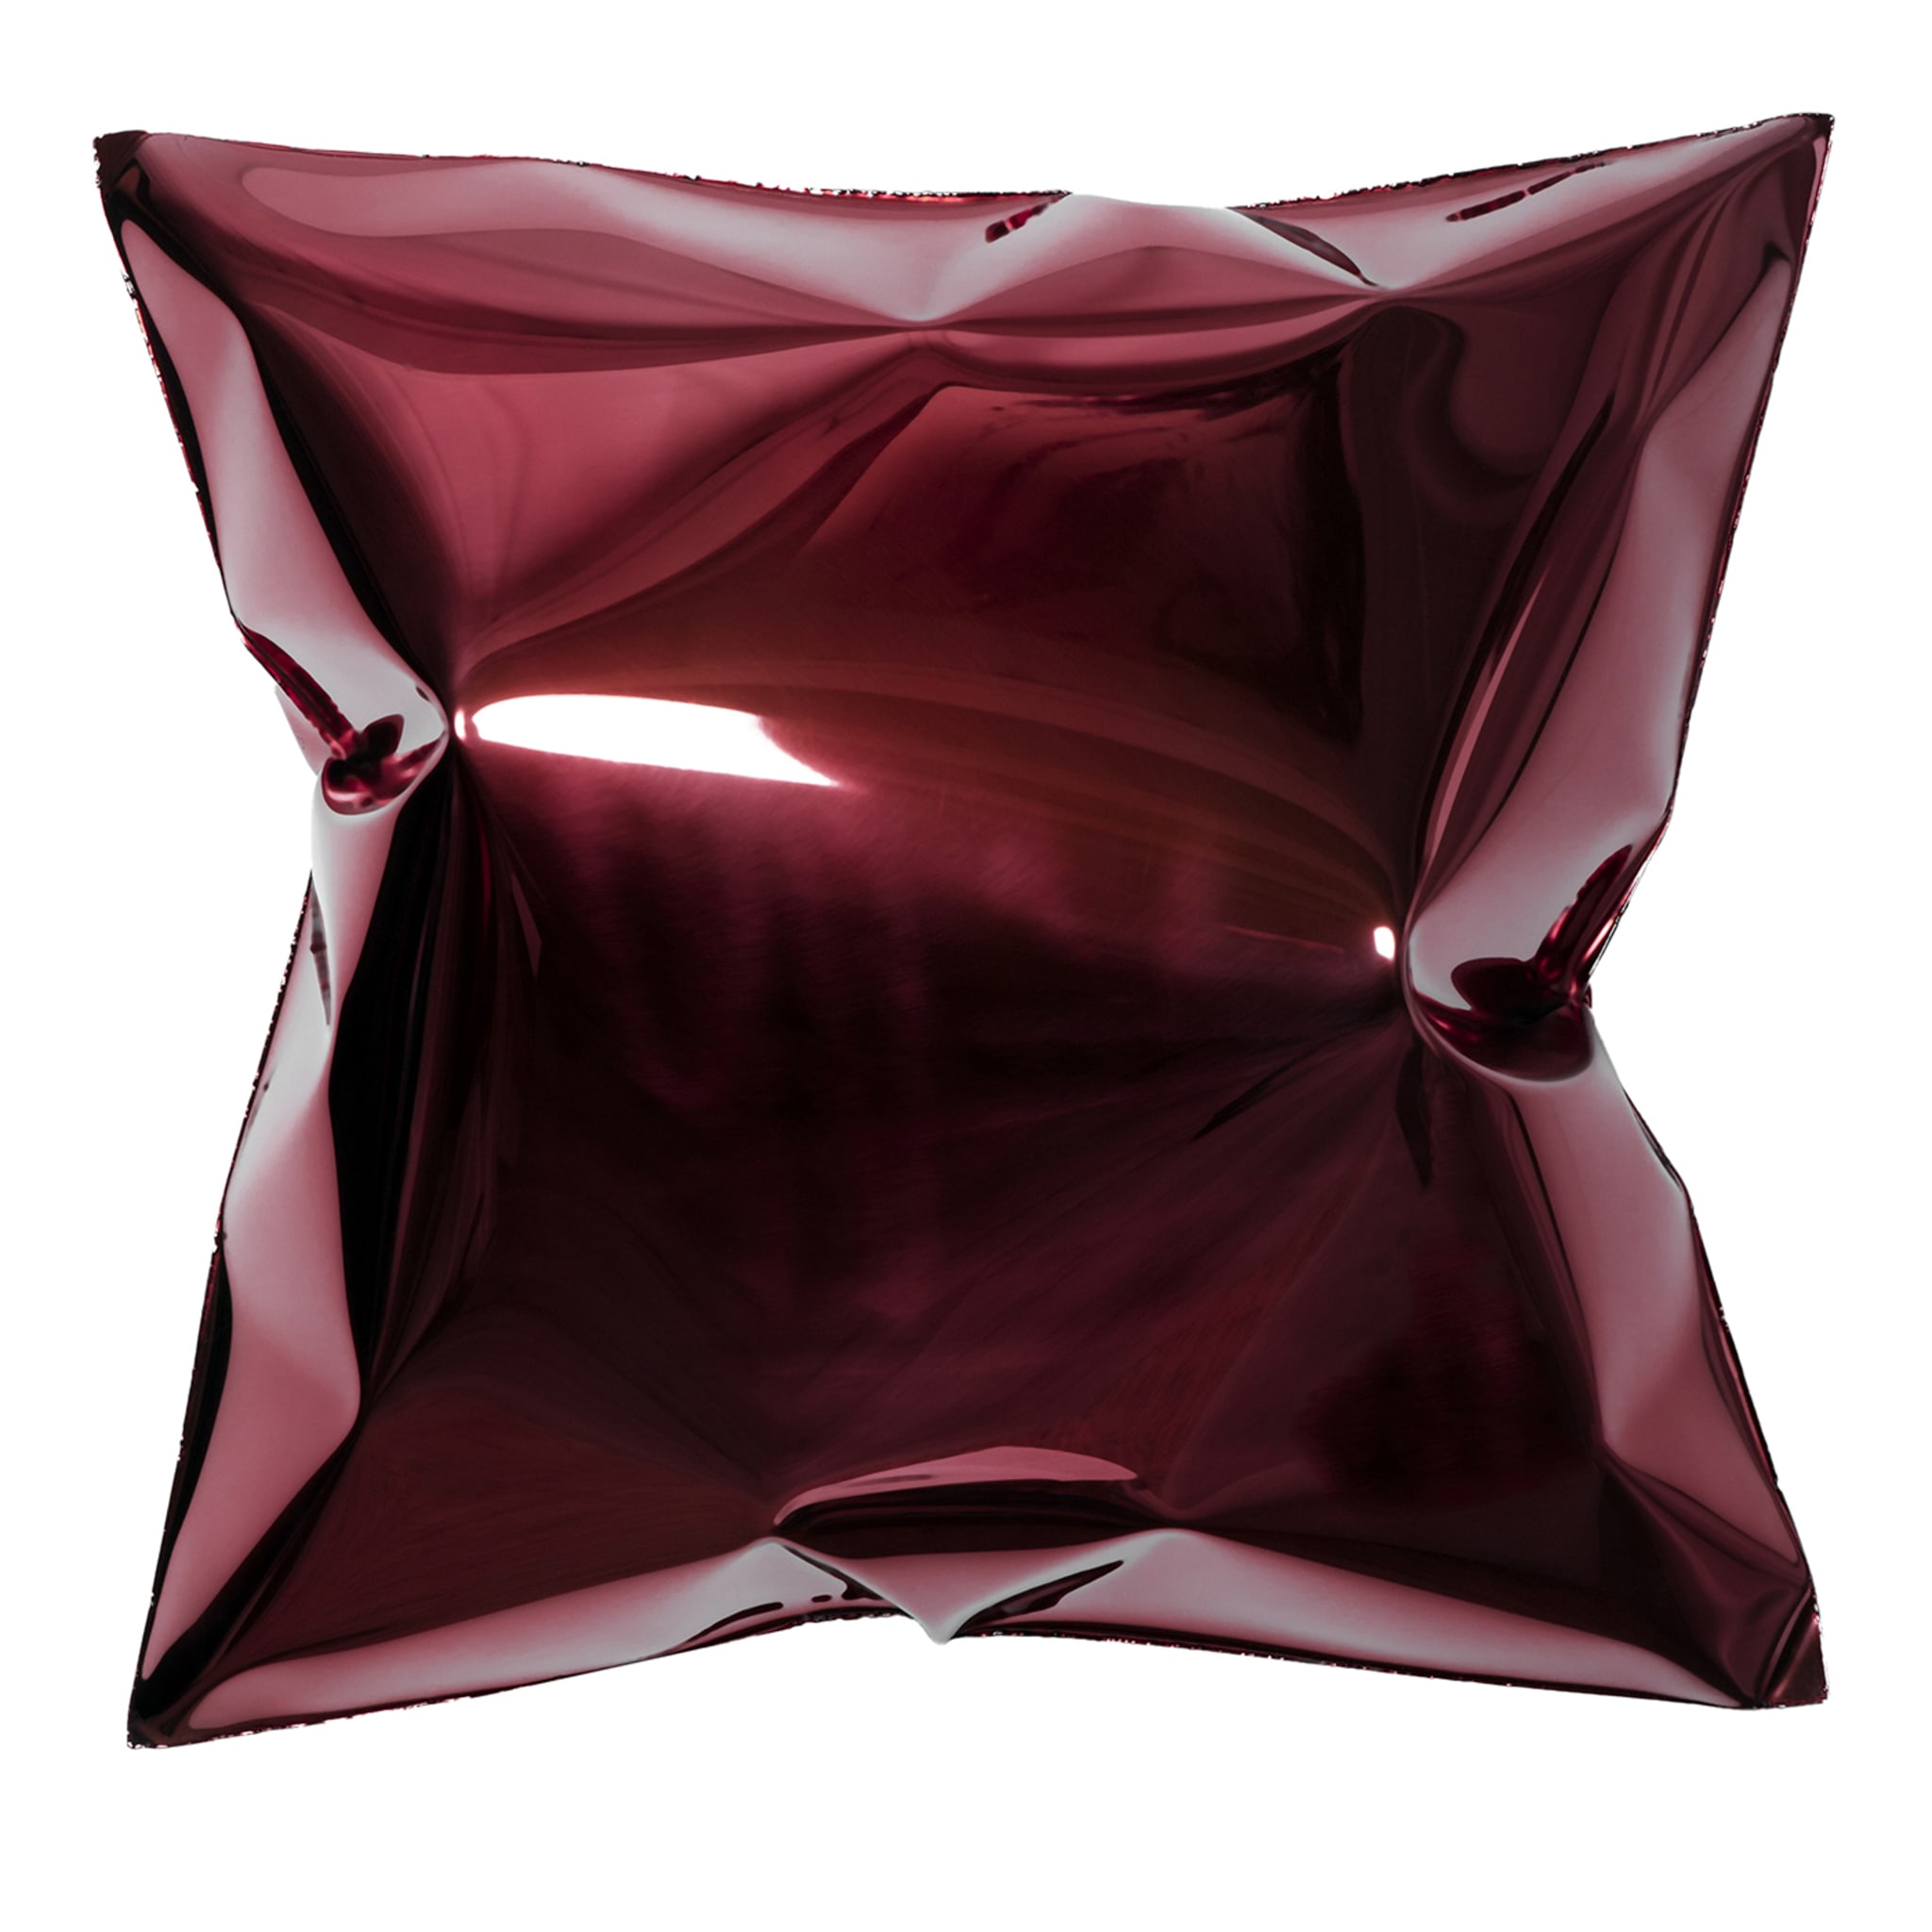 Square Red Pillow-Shaped Wall Sculpture #1 - Main view